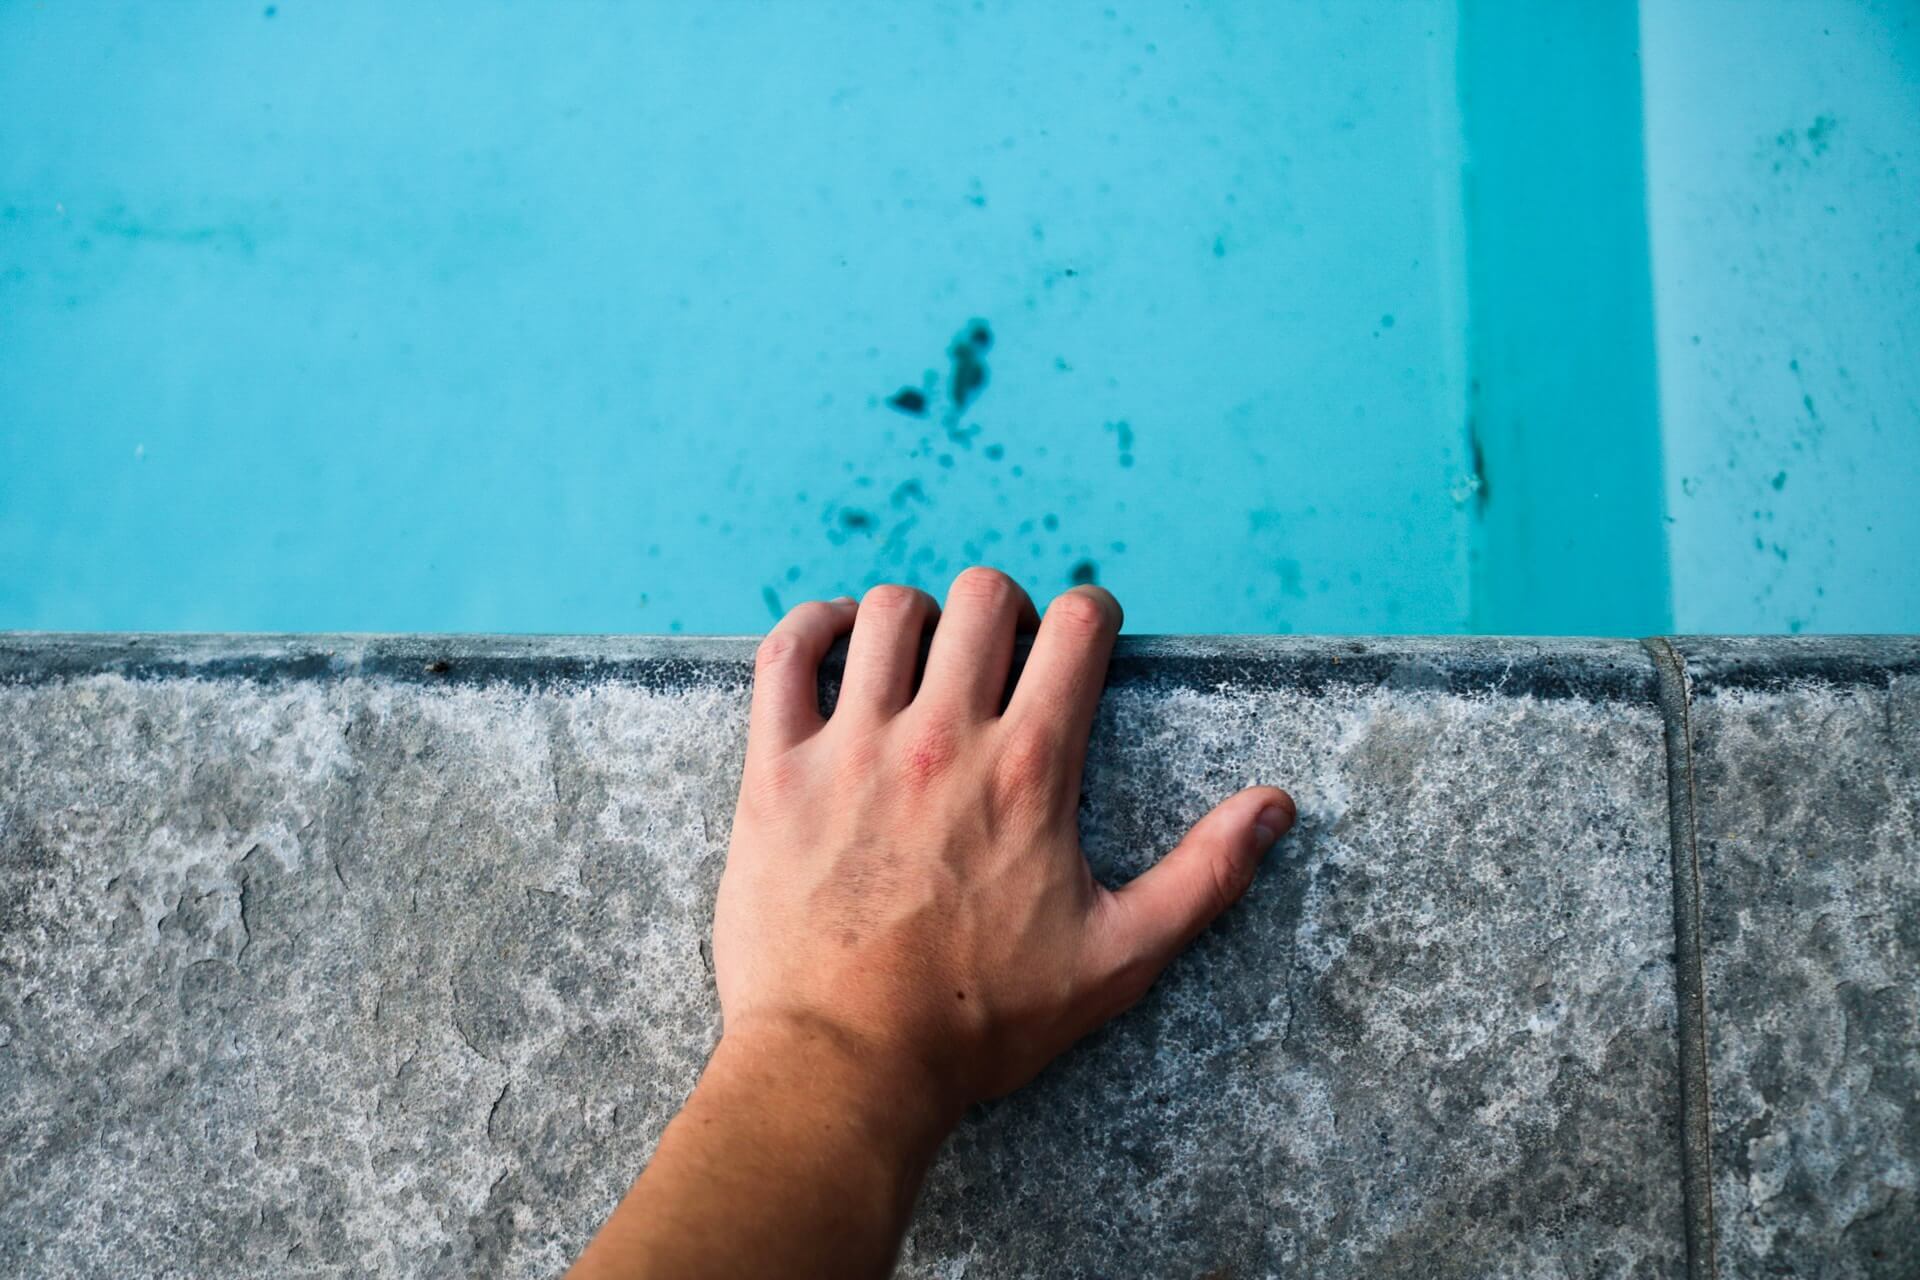 How to Get Dirt Out of Pool Without A Vacuum